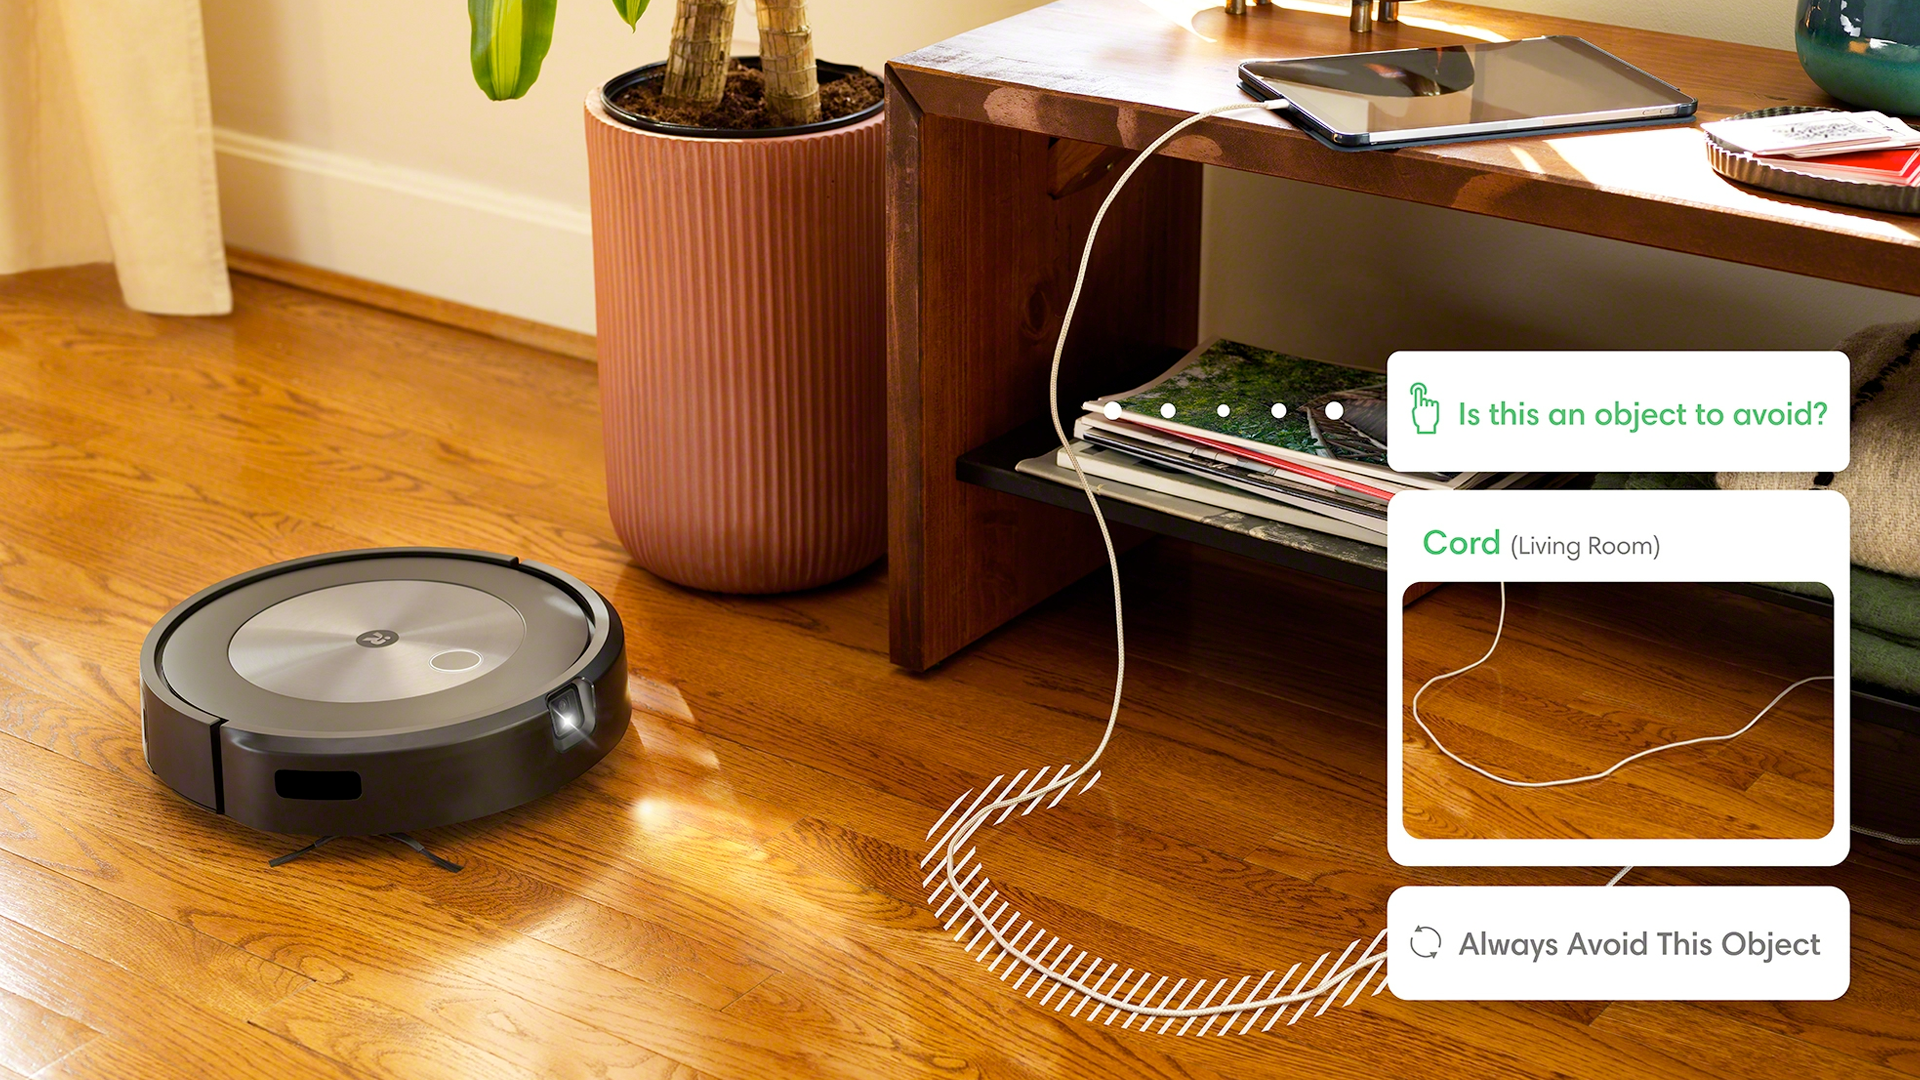 The Roomba J7 identifying and avoiding a power cable